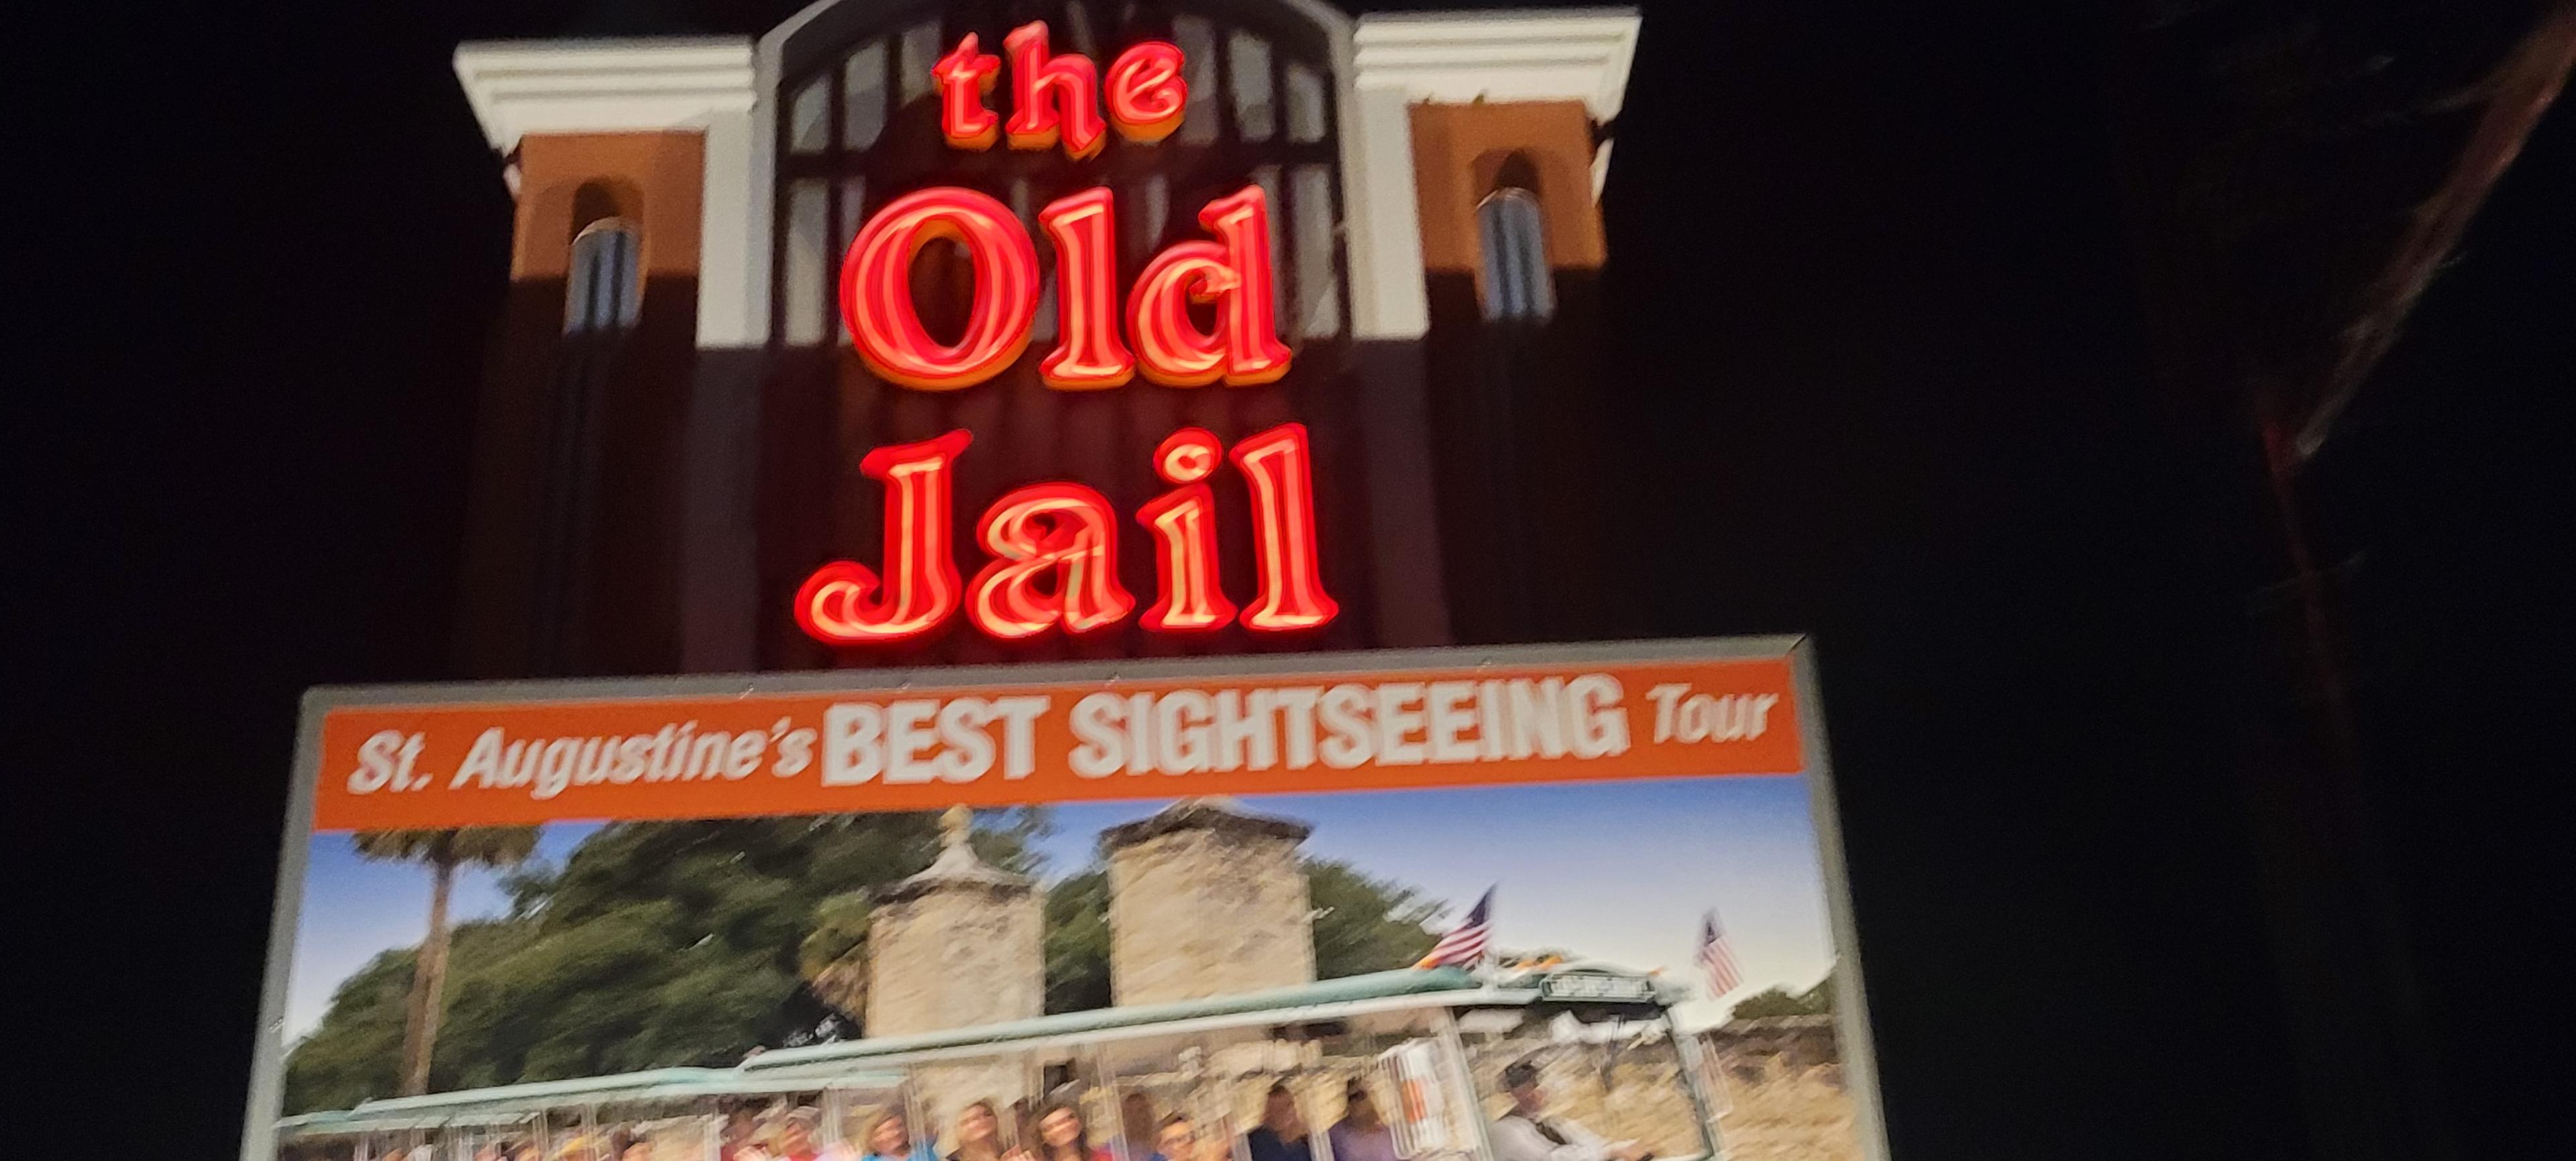 Escape to the old historic jail in St. Augustine - background banner